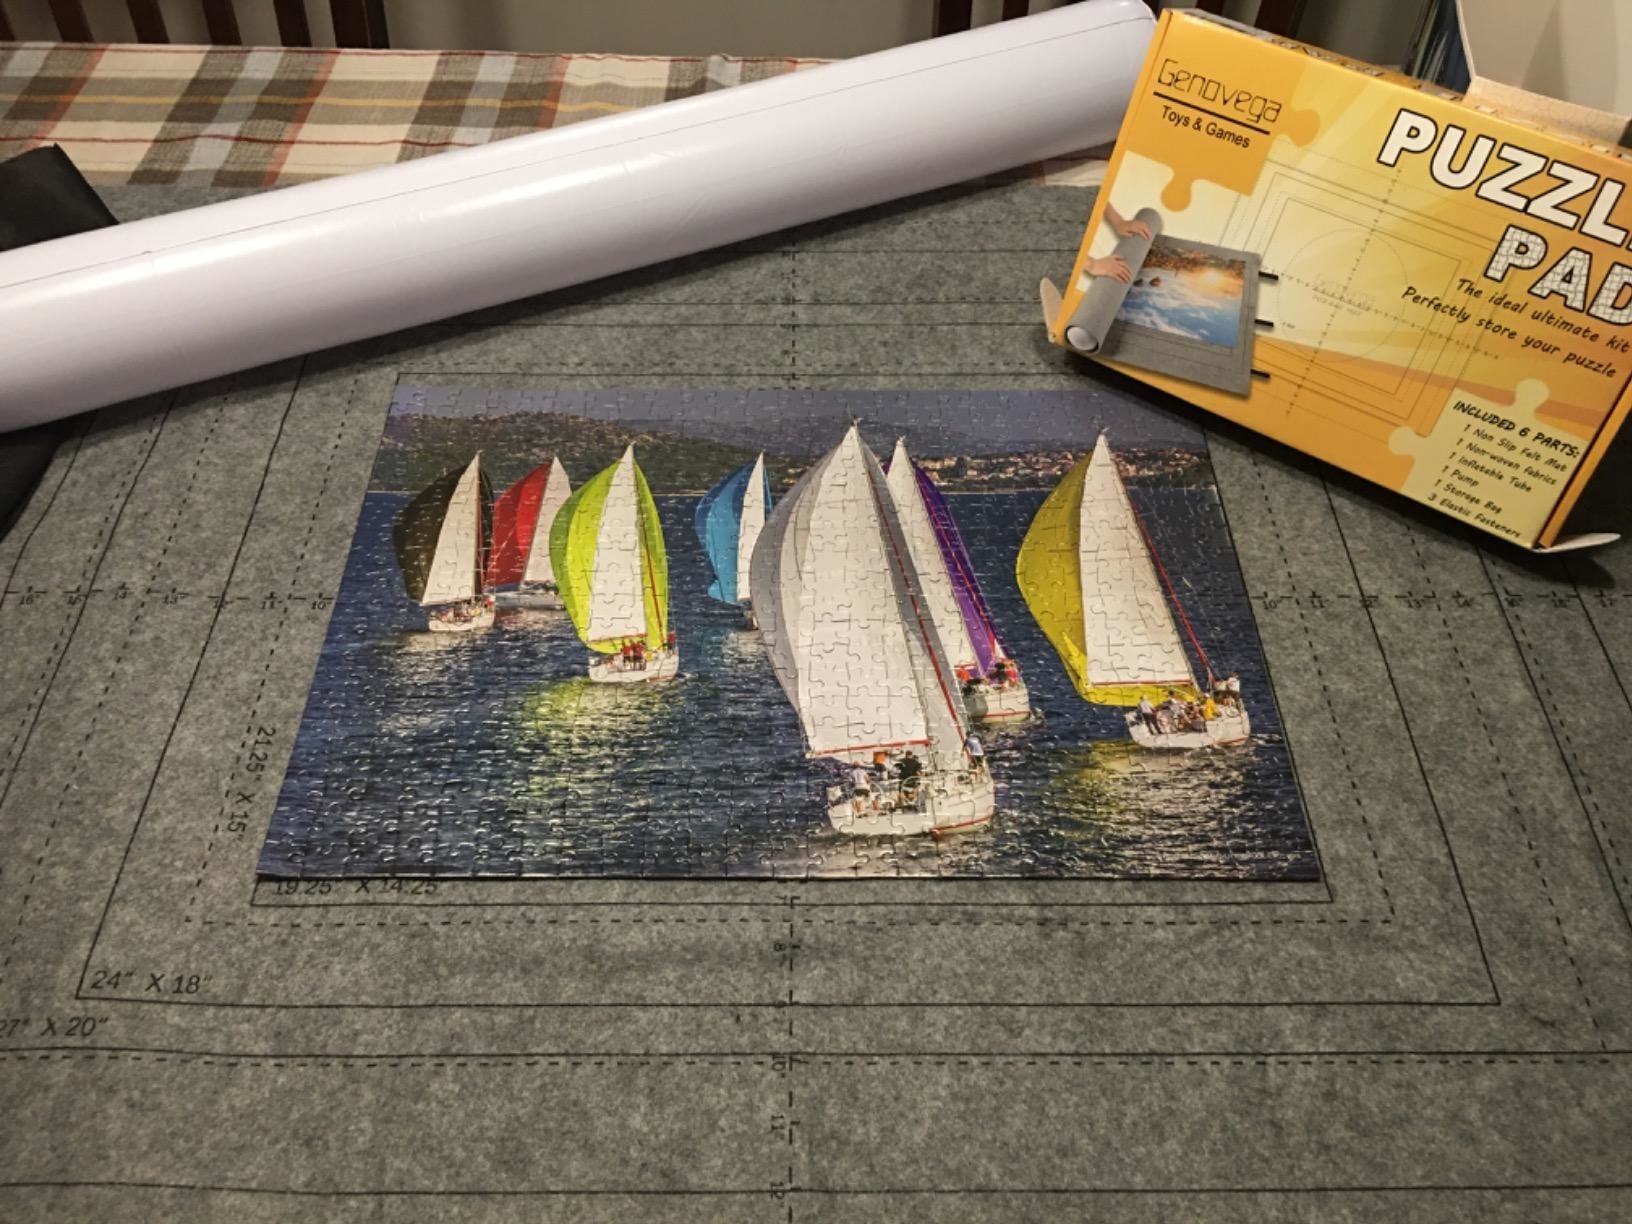 Reviewer image of a completed puzzle on the gray puzzle pad